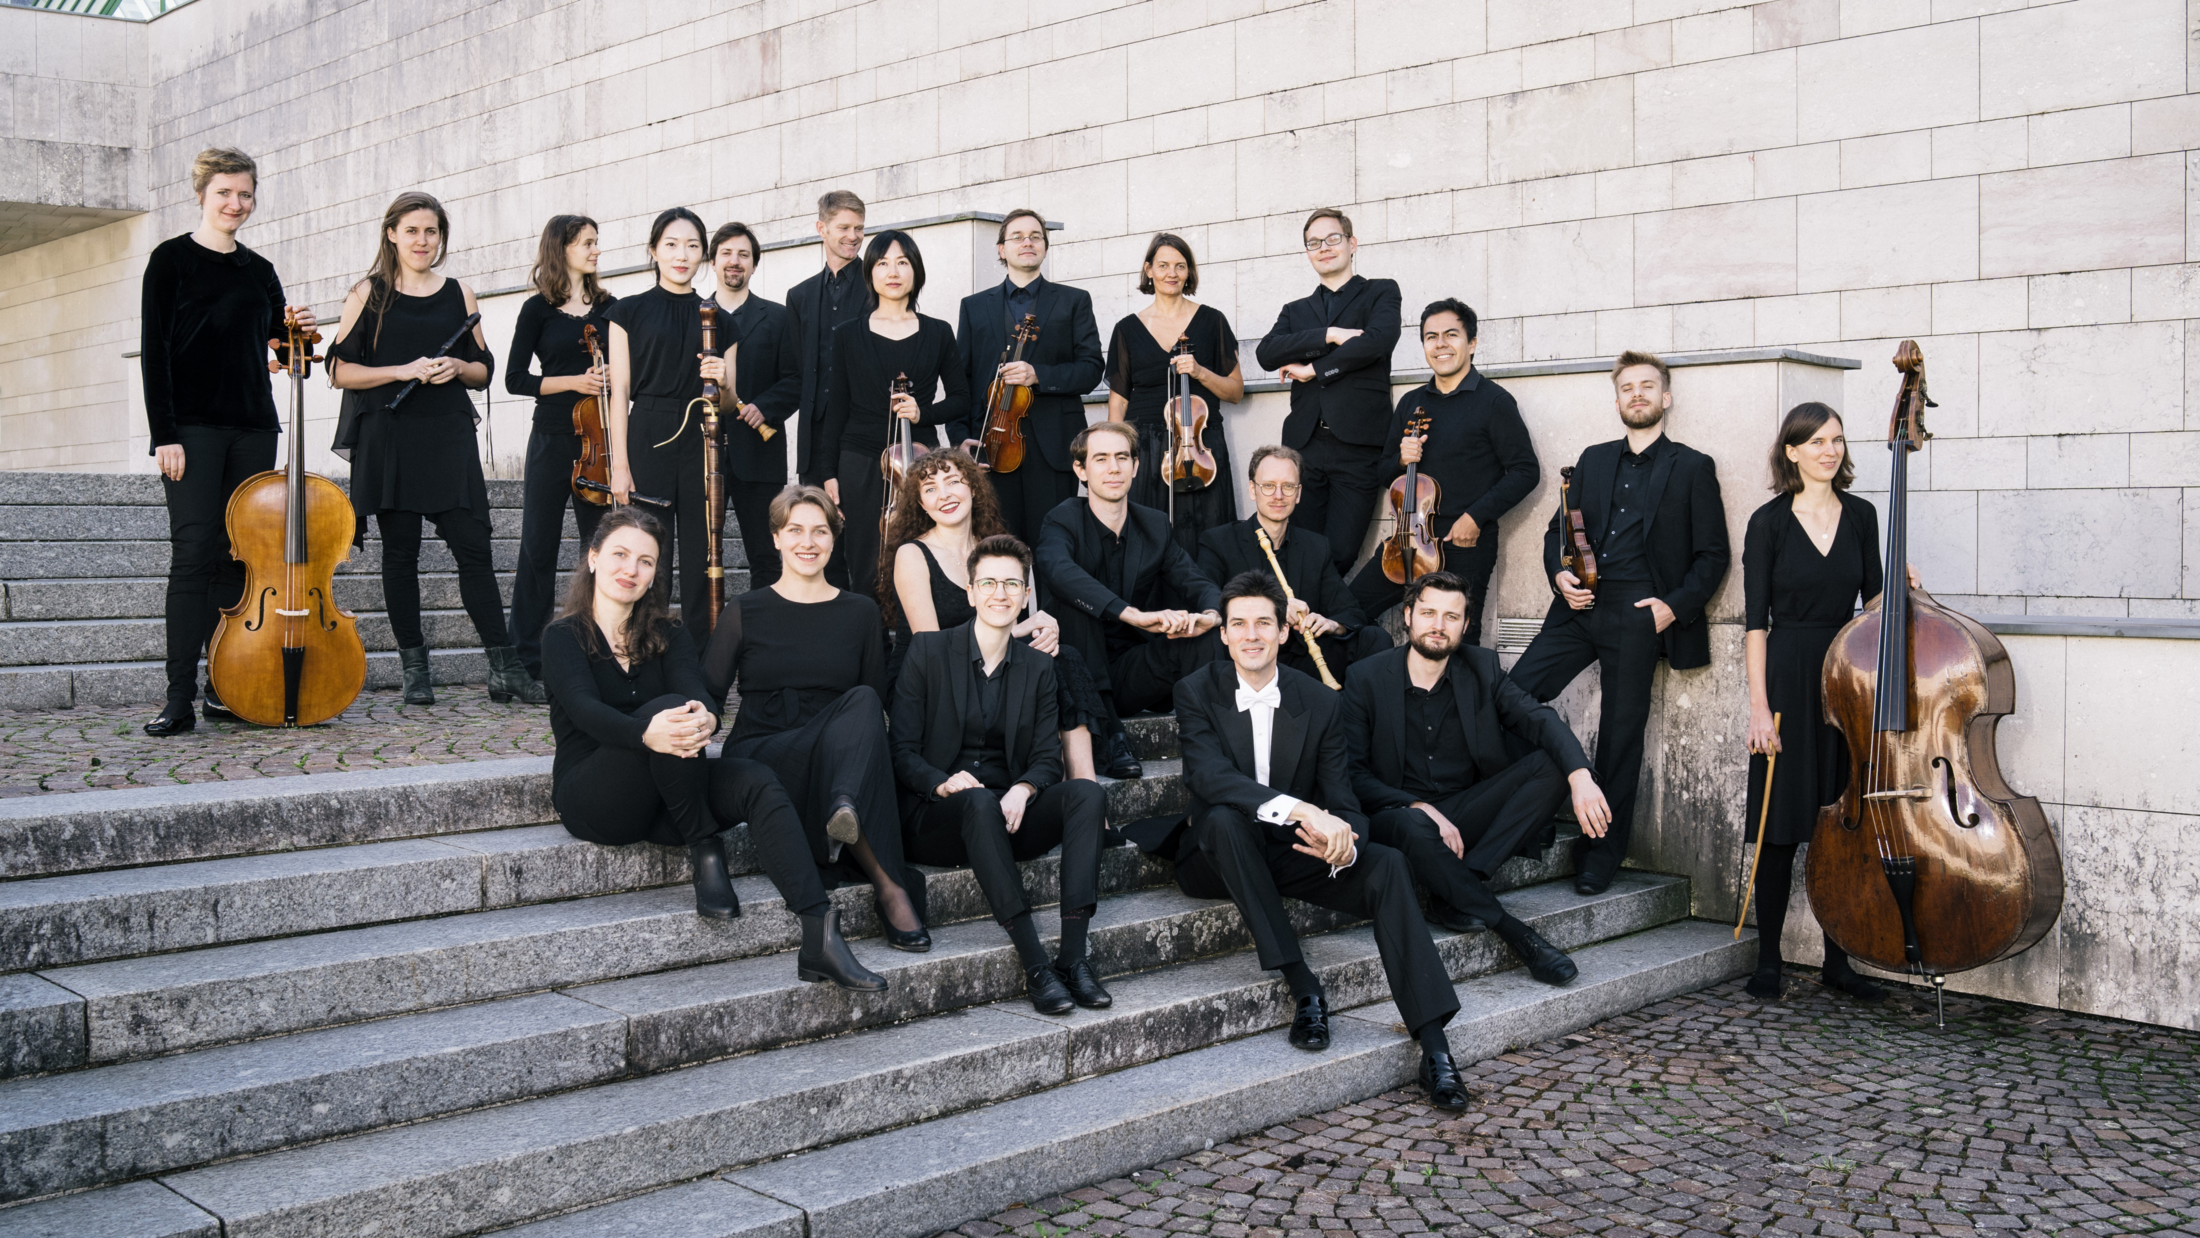 With the discovery of Francisco Valls, the multi-award-winning BachWerkVokal ensemble under the direction of Gordon Safari sends its Baroque Festival audience on an excursion to new Baroque sounds that were unheard of at the time - in both senses of the word. (Bild: Michael Brauer)